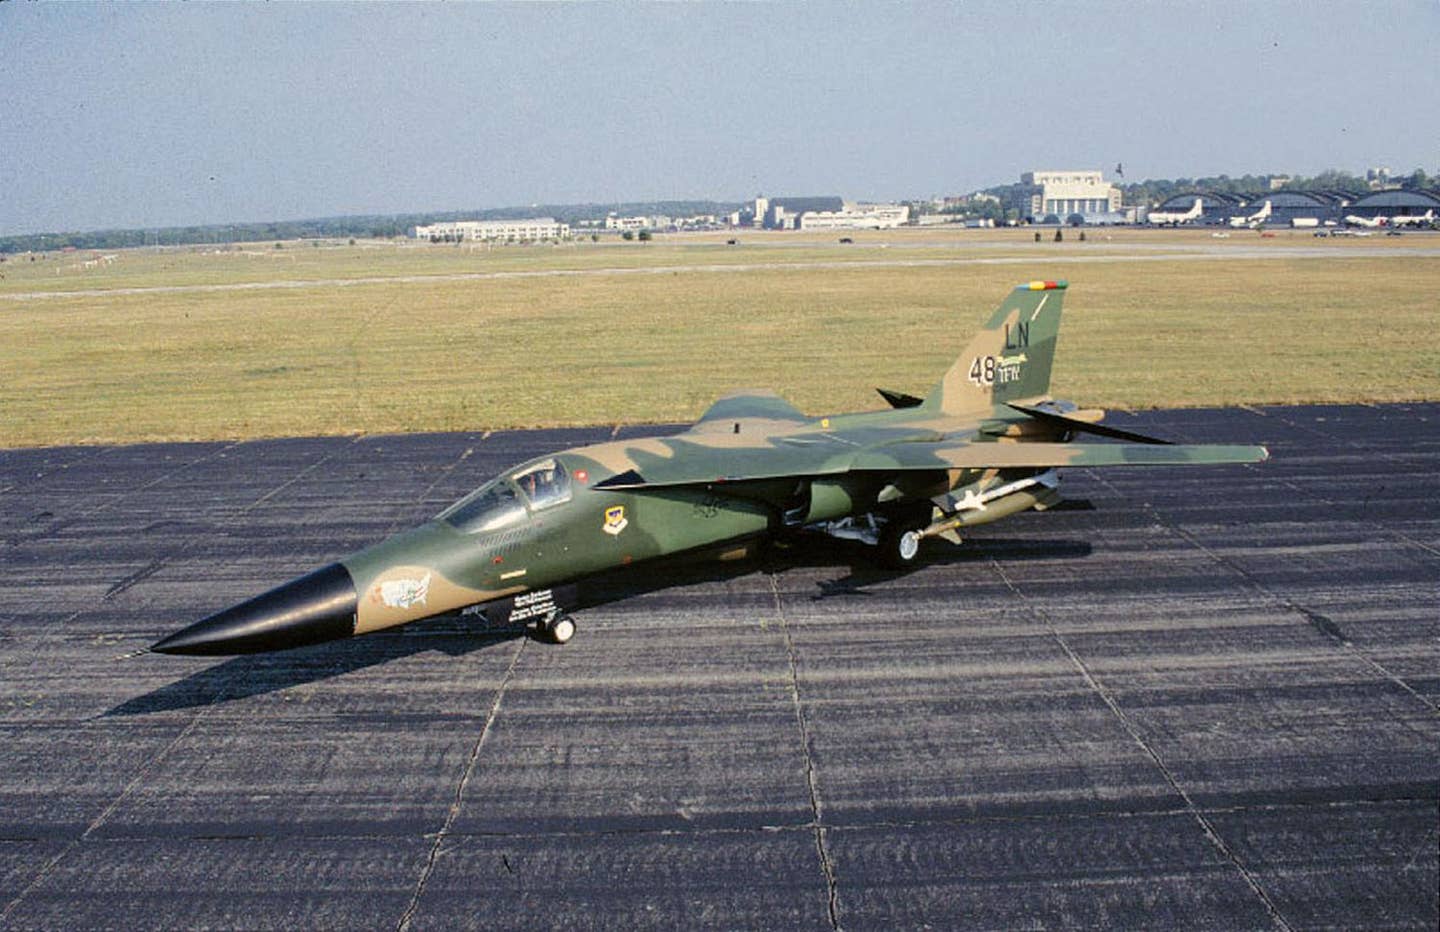 General Dynamics F-111F at the National Museum of the United States Air Force. (U.S. Air Force photo)